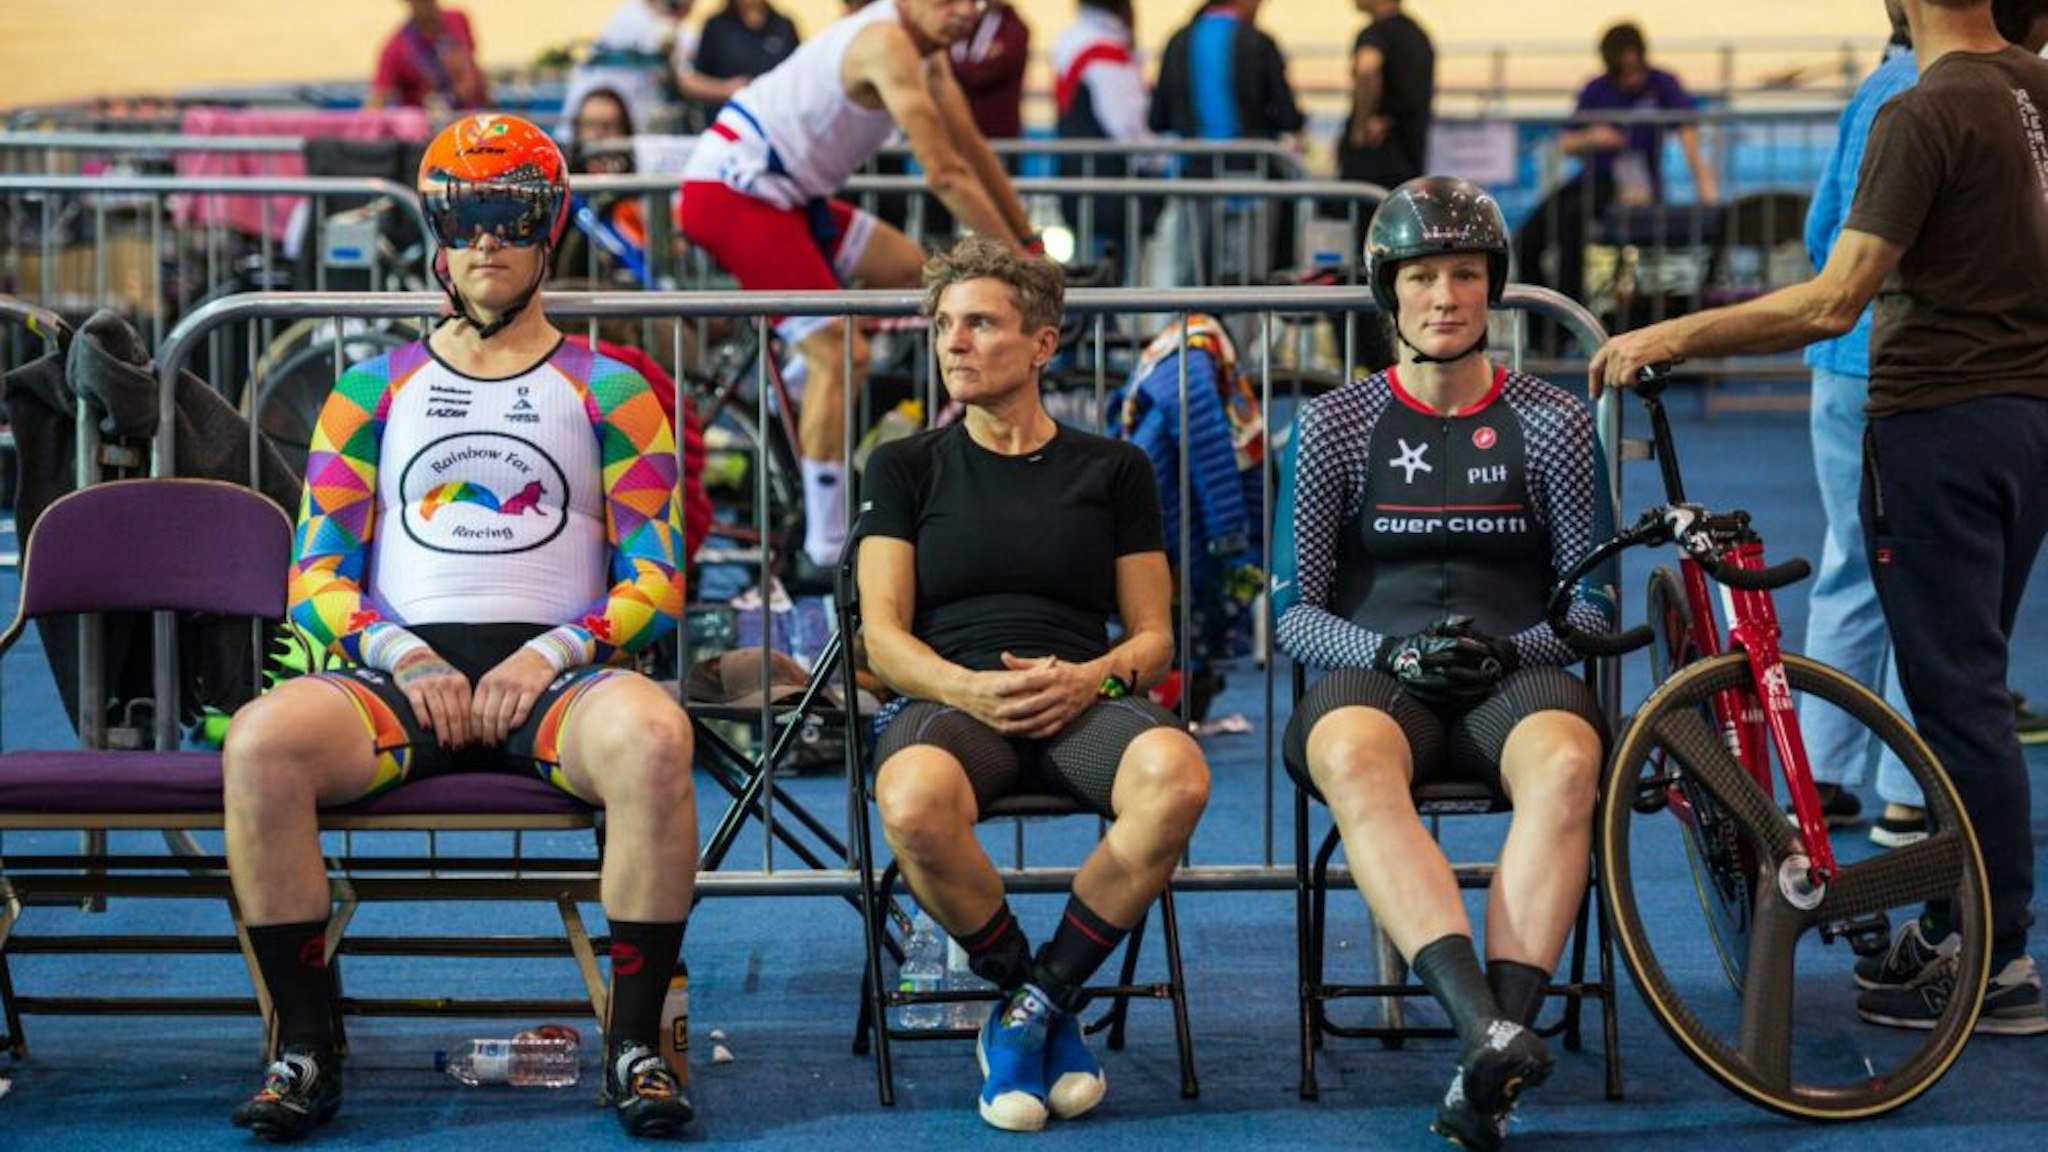 Canadian cyclist Rachel McKinnon (L) prepares to race against Australian Amber Walsh (2nd R) in their F35-39 sprint semi-final during the 2019 UCI Track Cycling World Masters Championship, in Manchester on October 19, 2019. - Transgender cyclist Rachel McKinnon has defended her right to compete in women's sport despite accepting trans athletes may retain a physical advantage over their rivals.